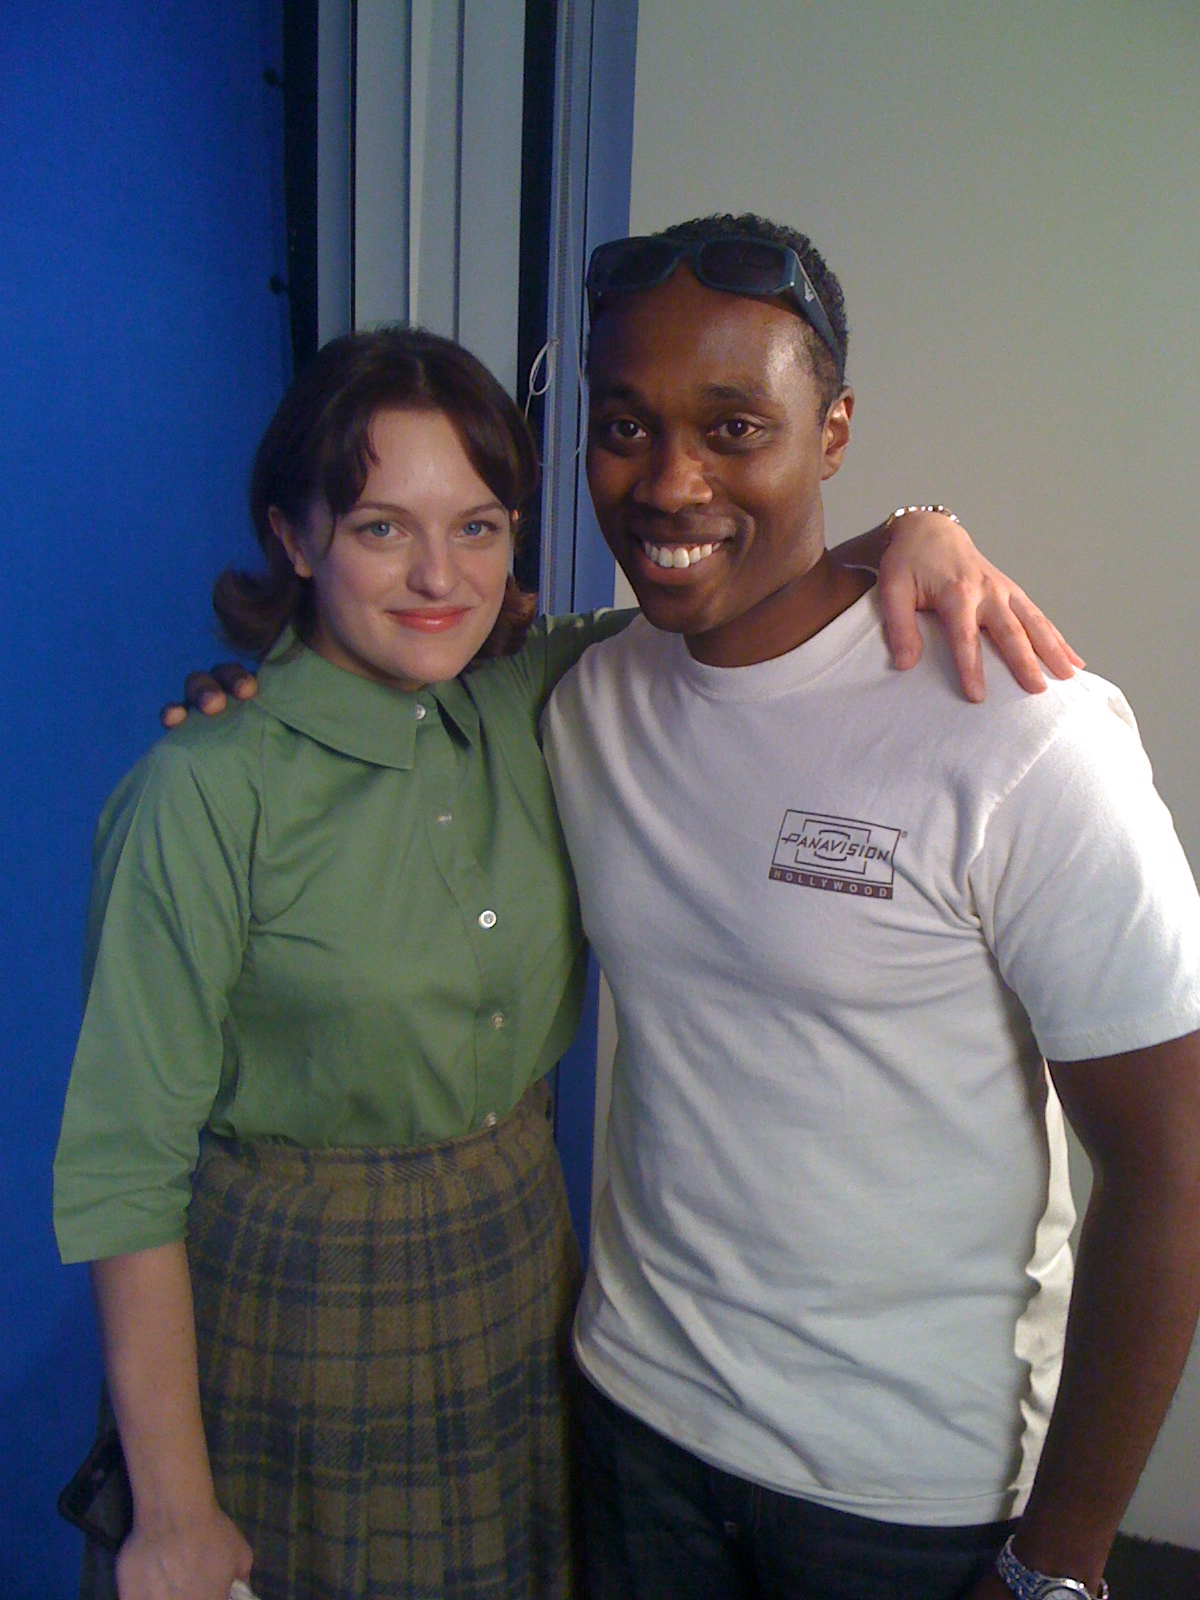 On The MADMEN set. Working as an editor on the MANMEN BluRay for seasons two and three. Left: Elisabeth Moss Right: Abdul Stone Jackson